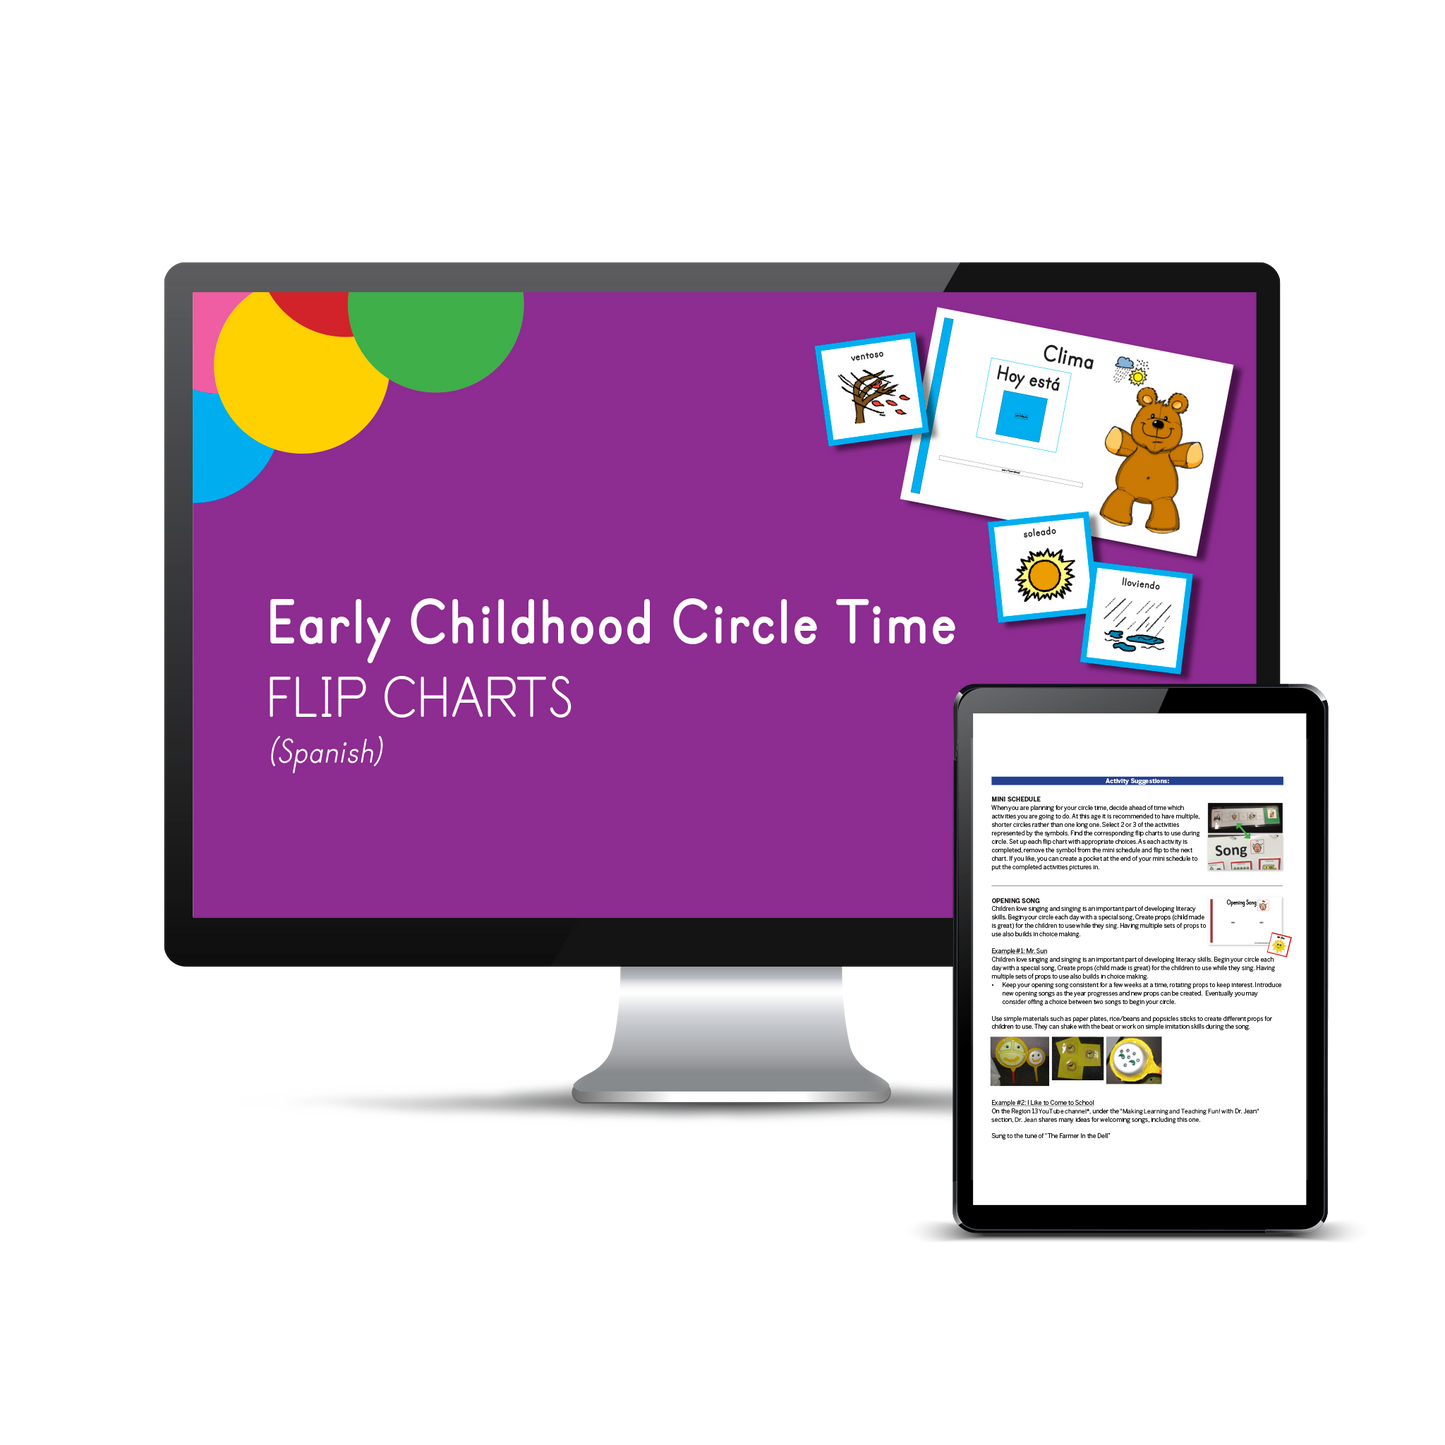 Early Childhood Circle Time Flip Charts - Spanish (Downloadable PDFs)